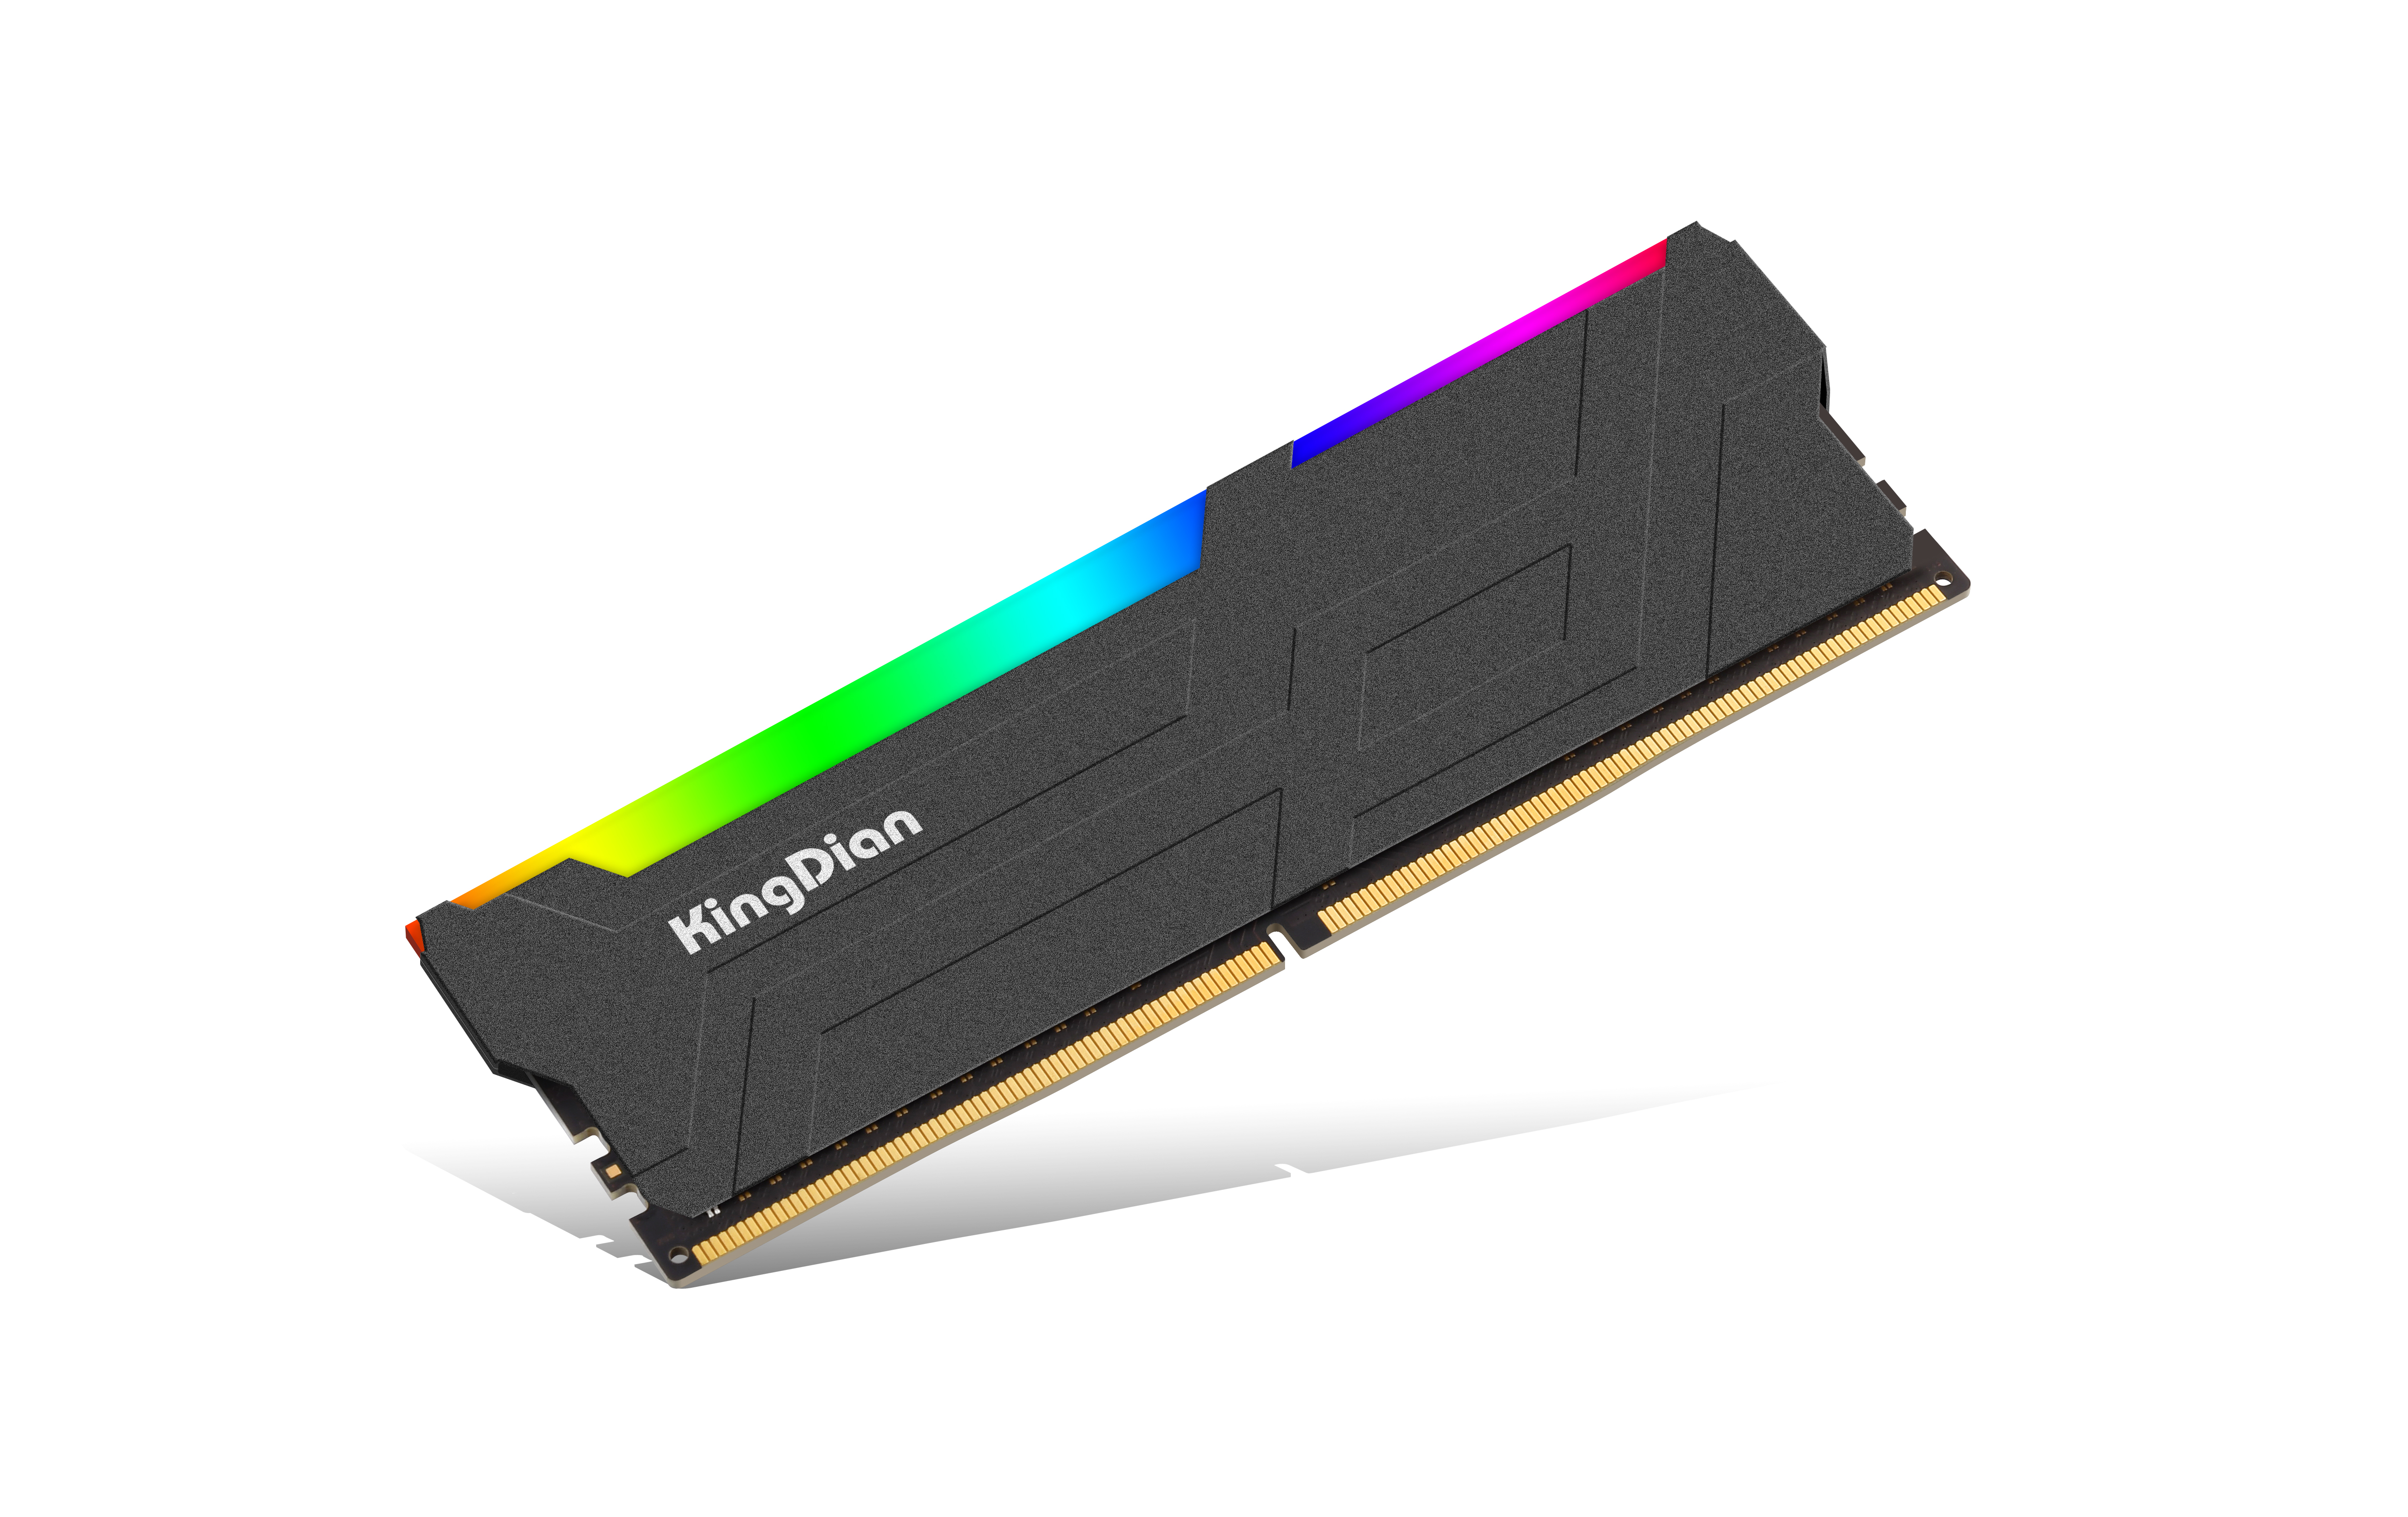 Enhance your system's performance with KingDian DDR4 UDIMM RGB Series RH42.